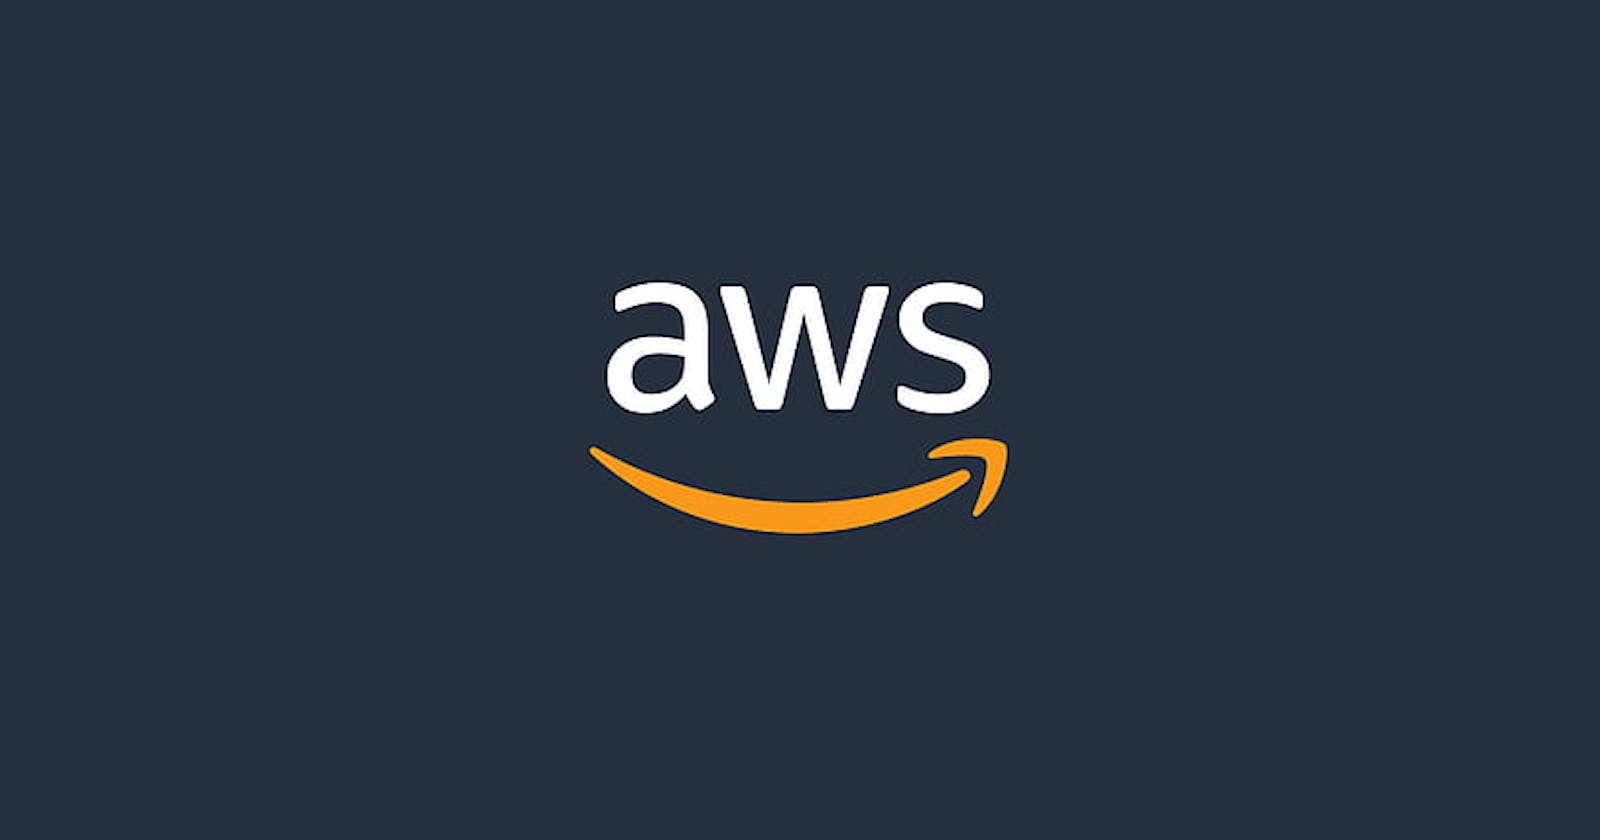 Key components of AWS